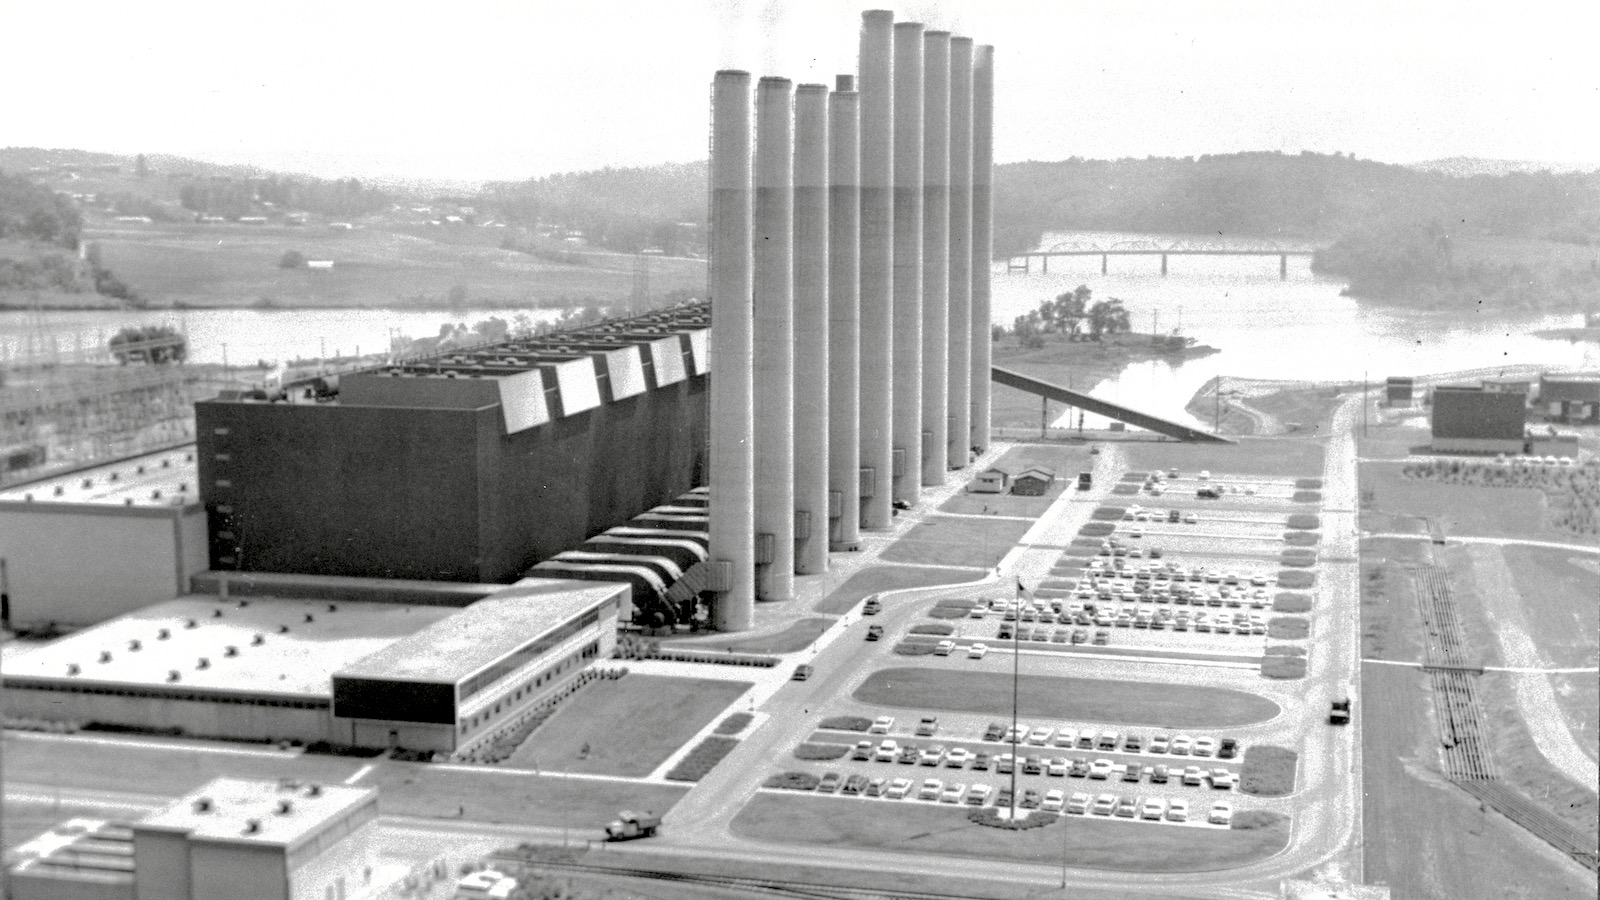 A black-and-white photo shows the main building and nine towering smokestacks of the Kingston Fossil Plant on the banks of the Clinch River near Kingston, Tennessee.